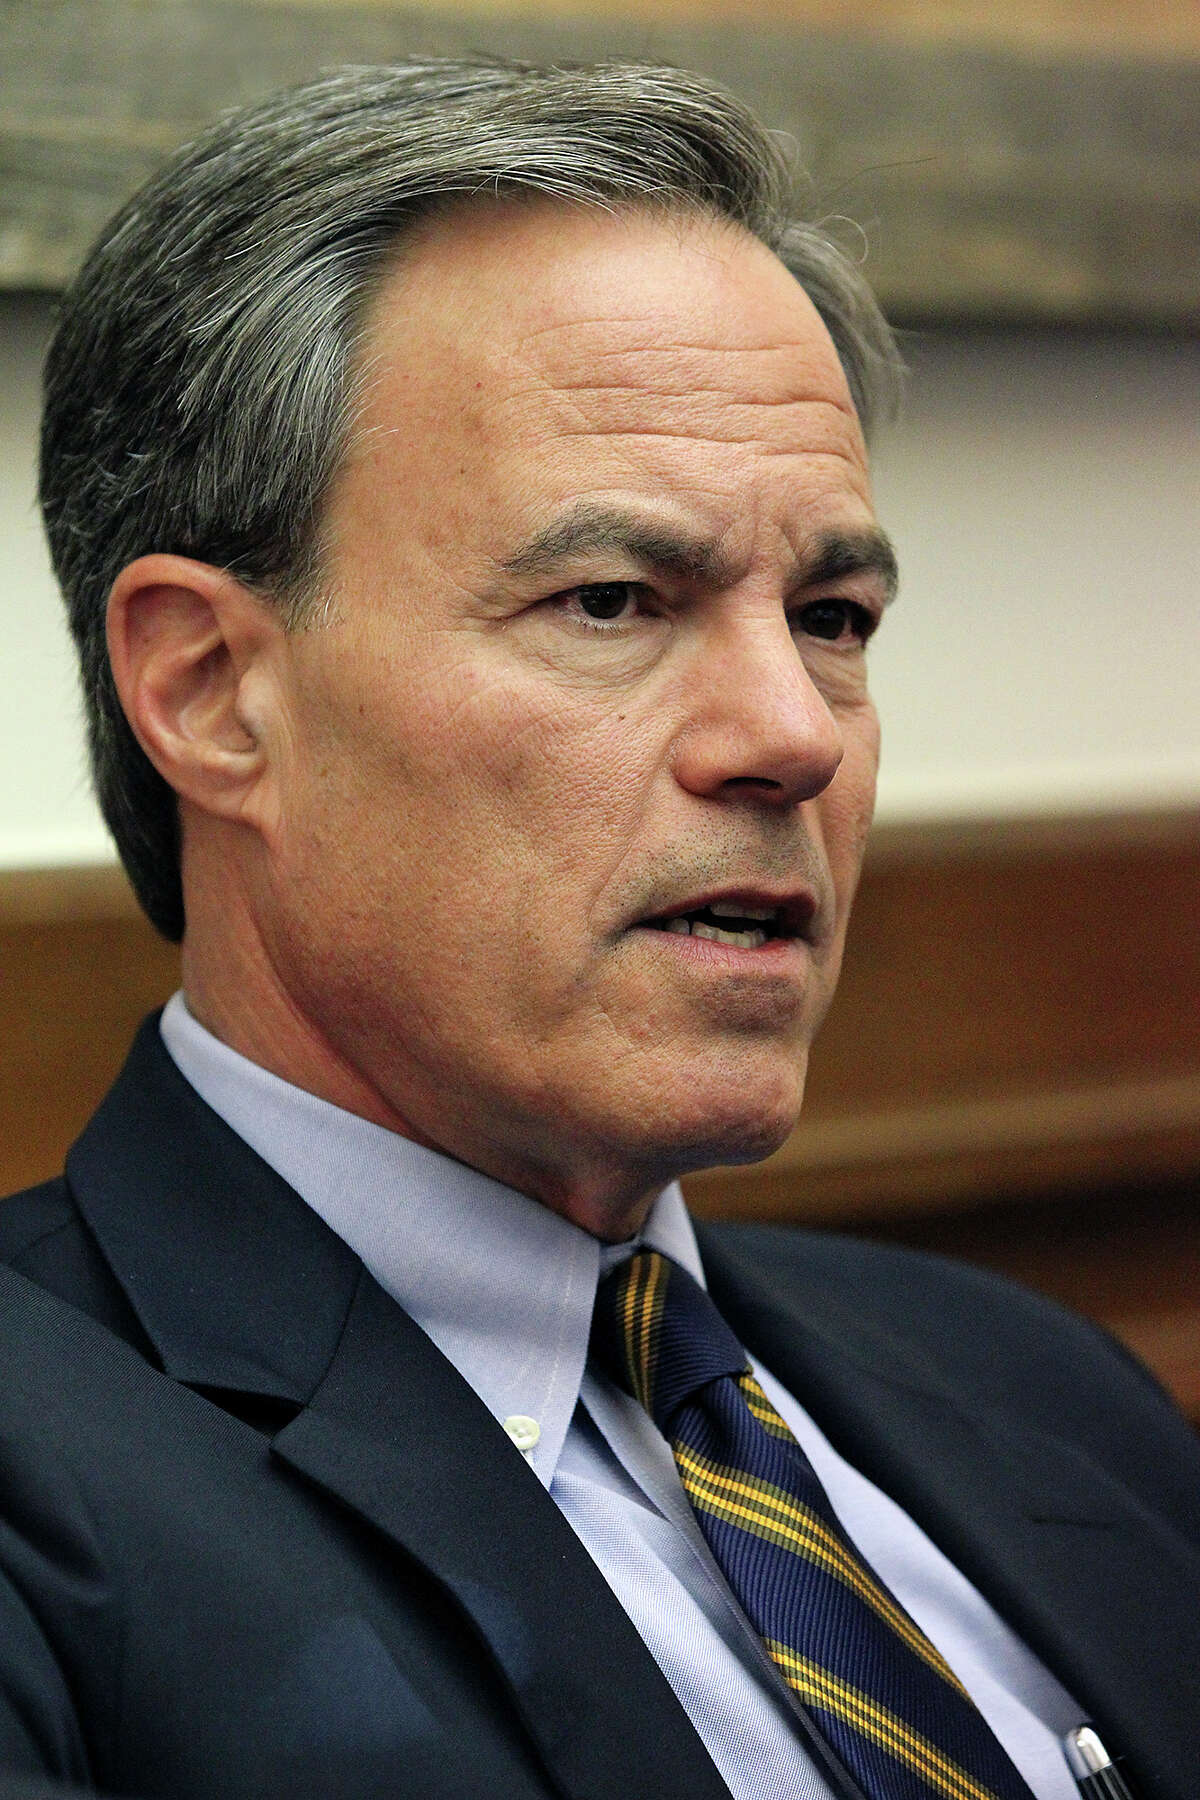 Texas Speaker of the House, Joe Straus answers questions in his office on January 7, 2015.